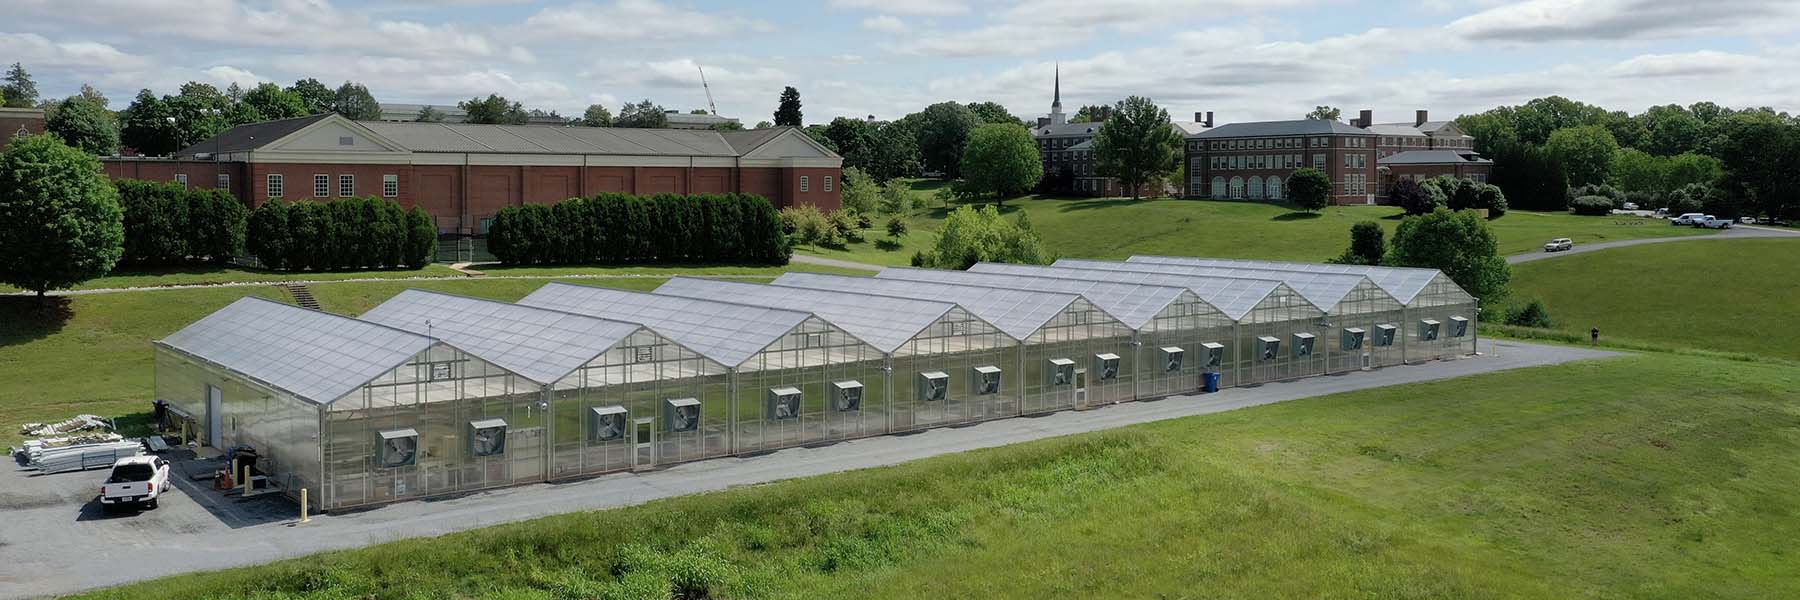 outside commercial greenhouse